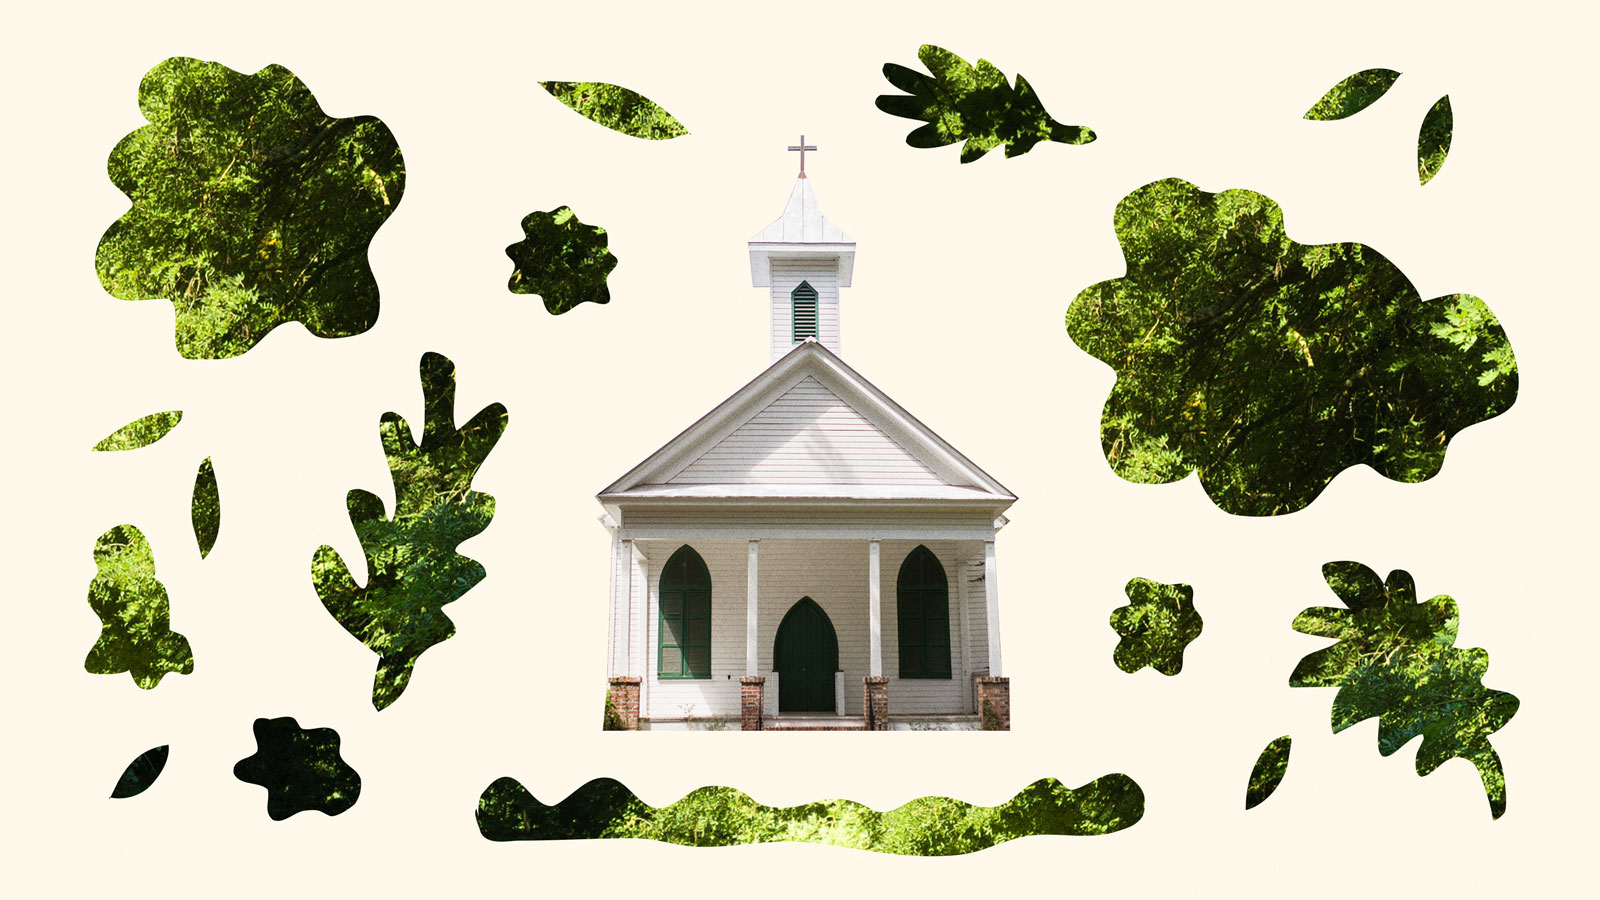 Collage of white church with green shutters surrounded by leafy green shapes on a cream background